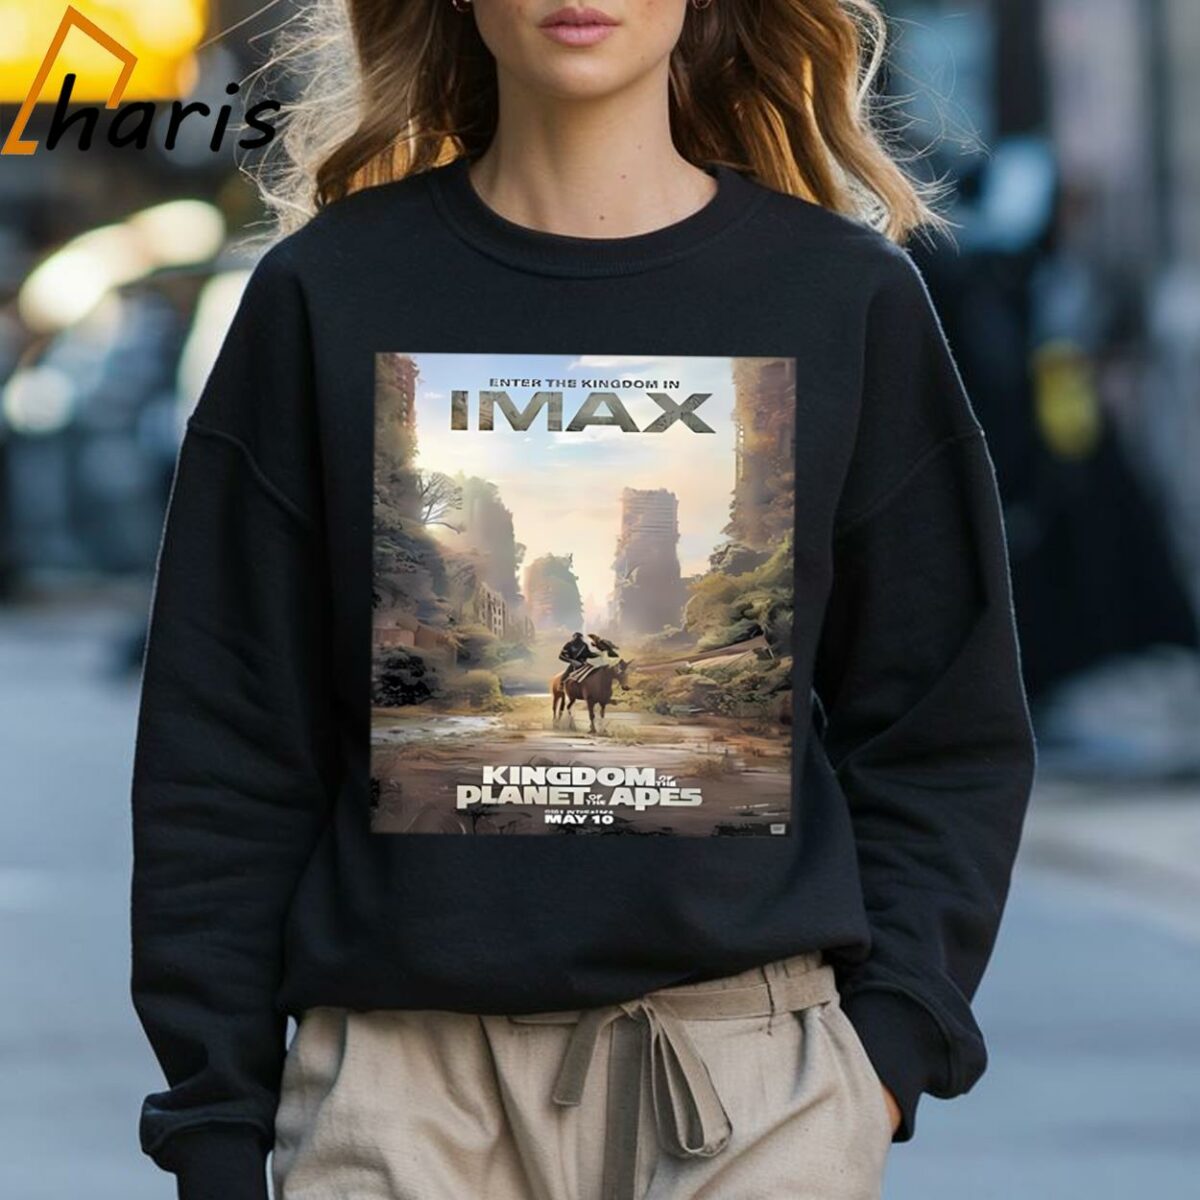 Enter The Kingdom In Imax Kingdom Of The Planet Of The Apes Shirt 3 Sweatshirt